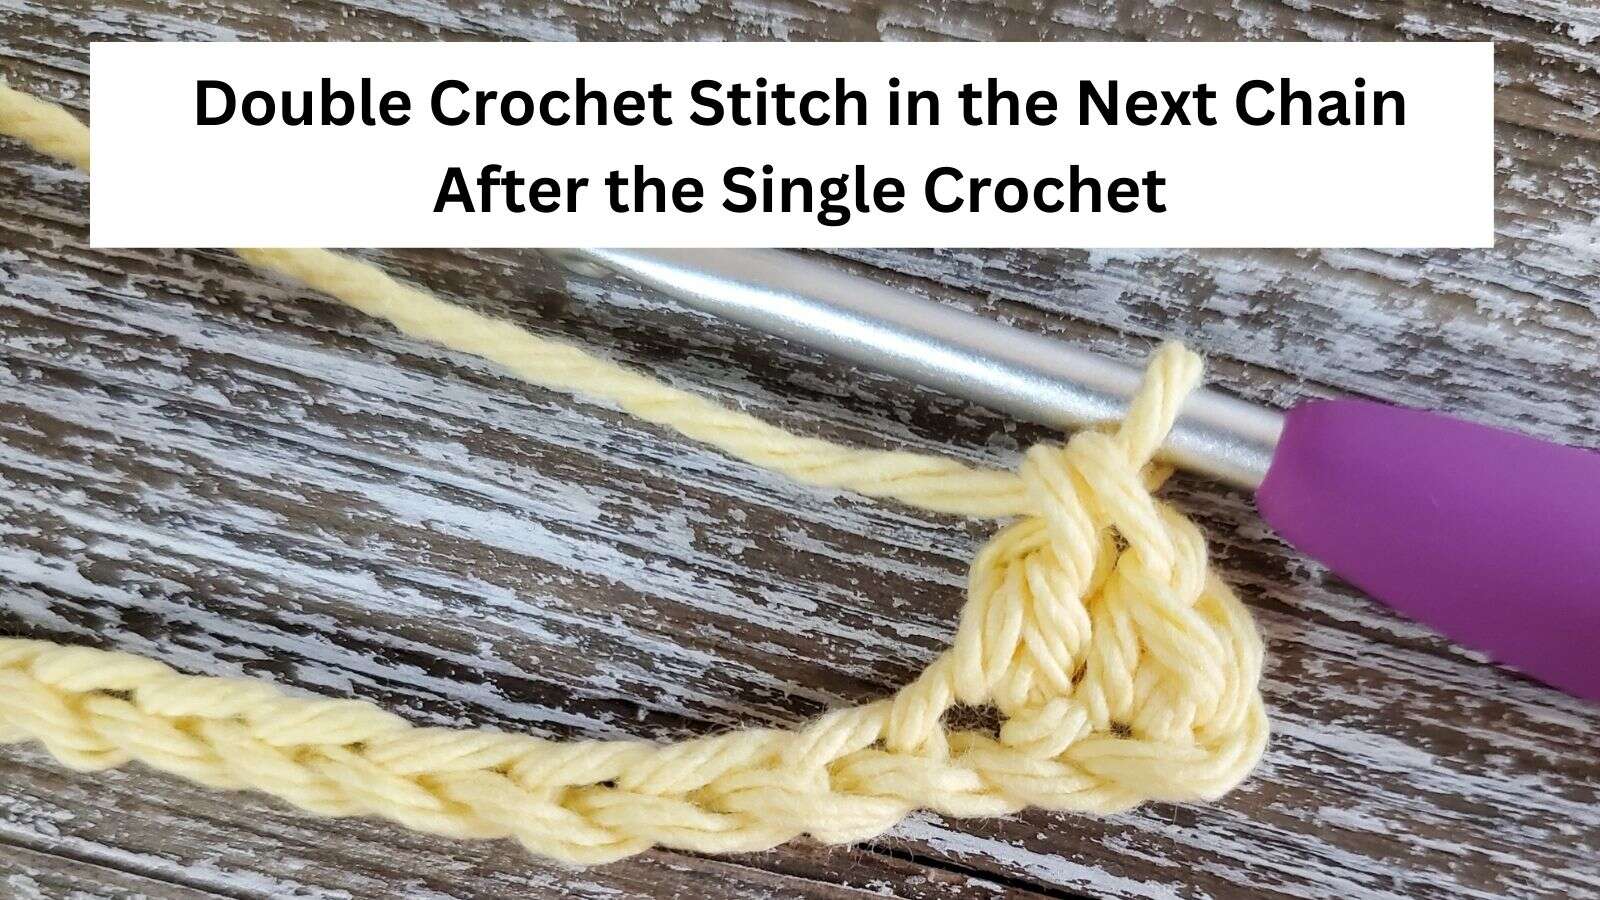 The Lemon Peel Stitch - a double crochet stitch in the chain after the single crochet